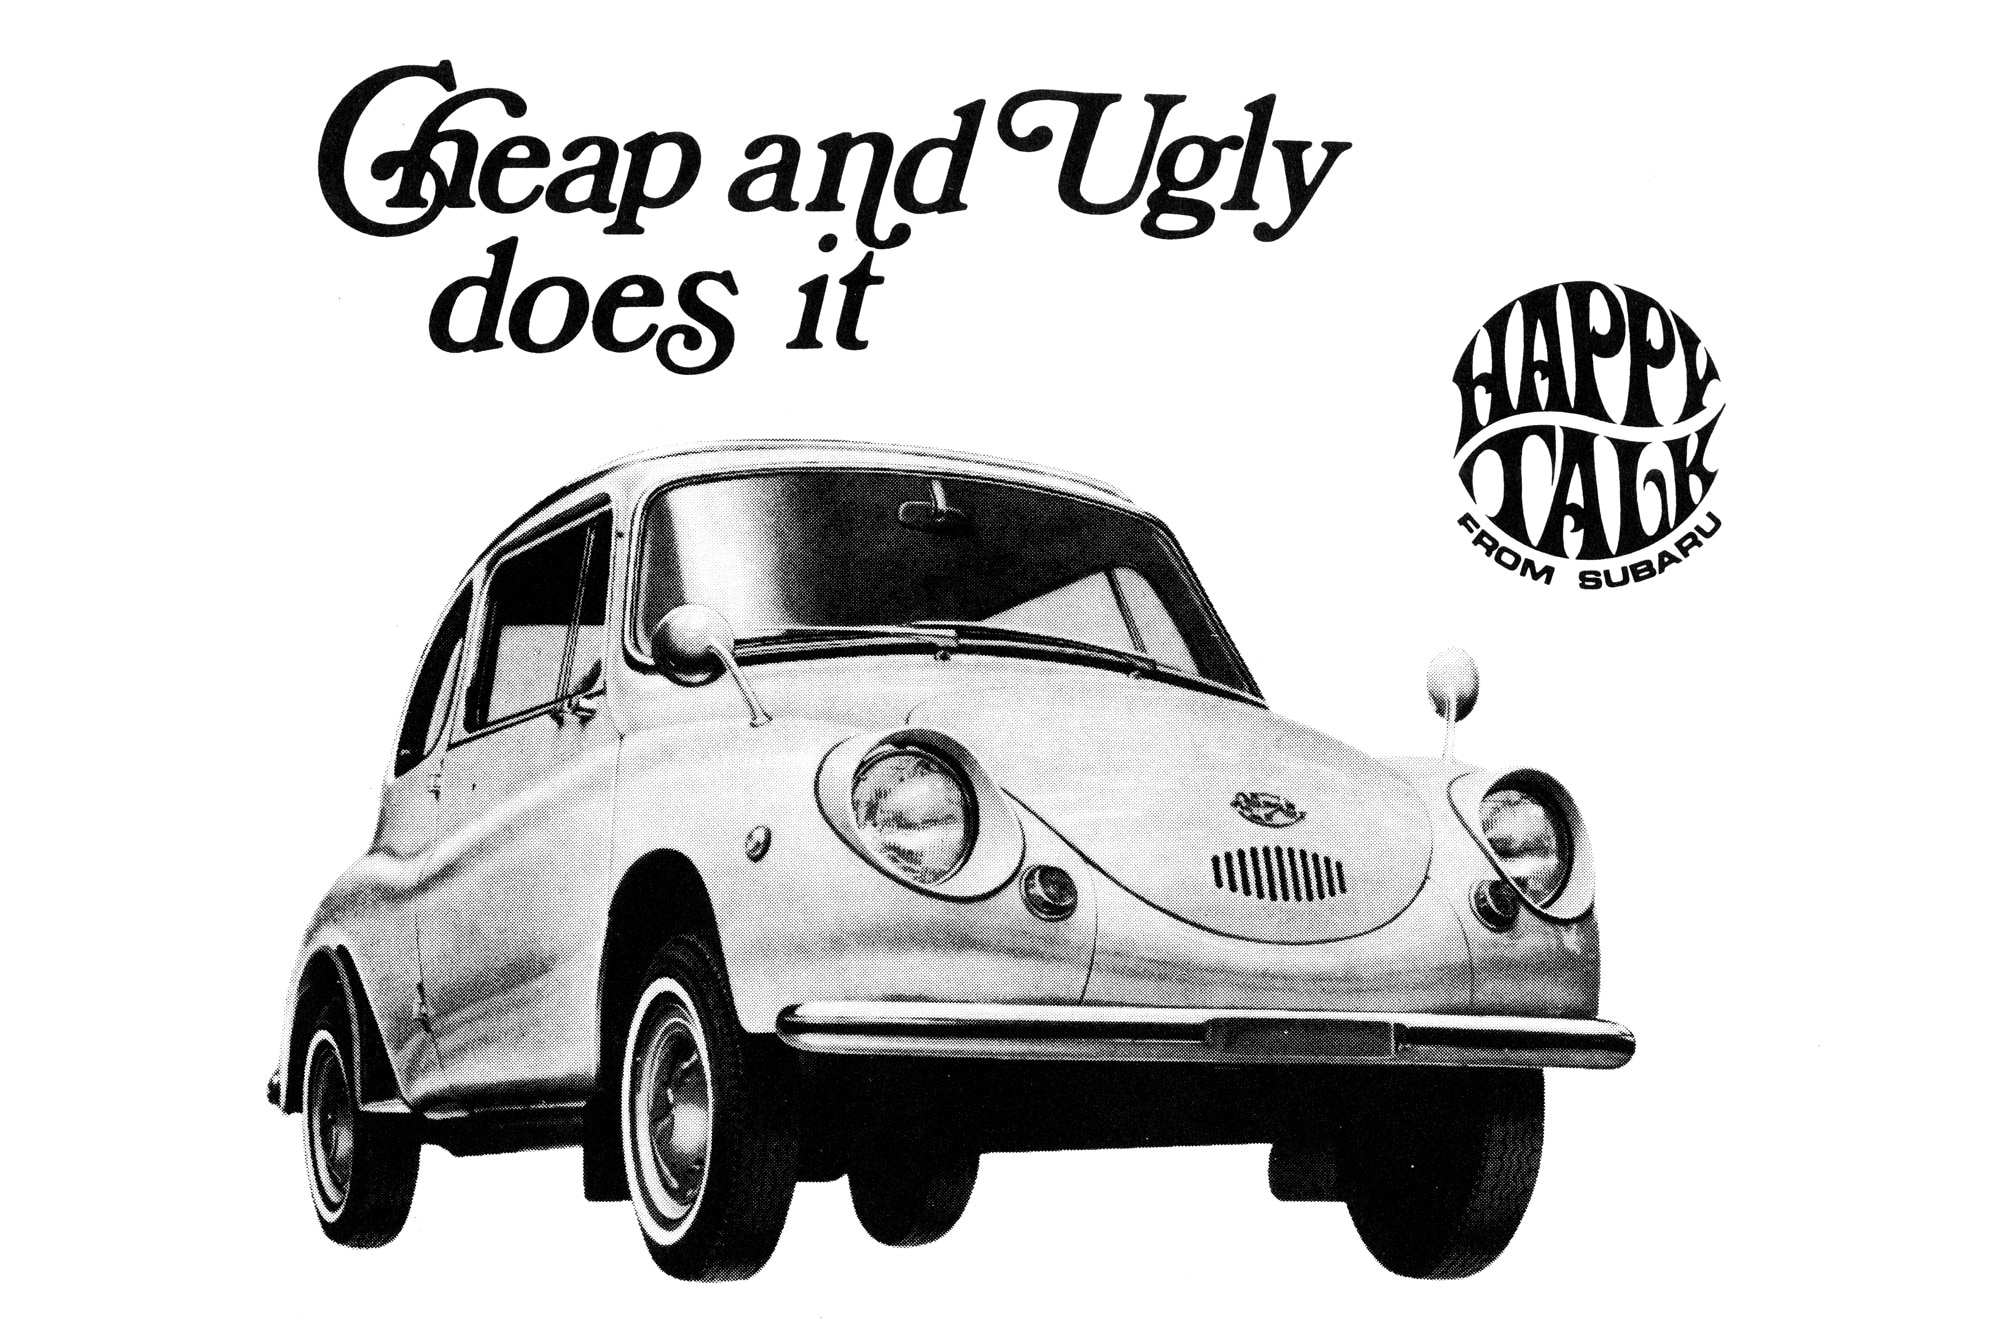 Advertisement for a Subaru 360 coupe